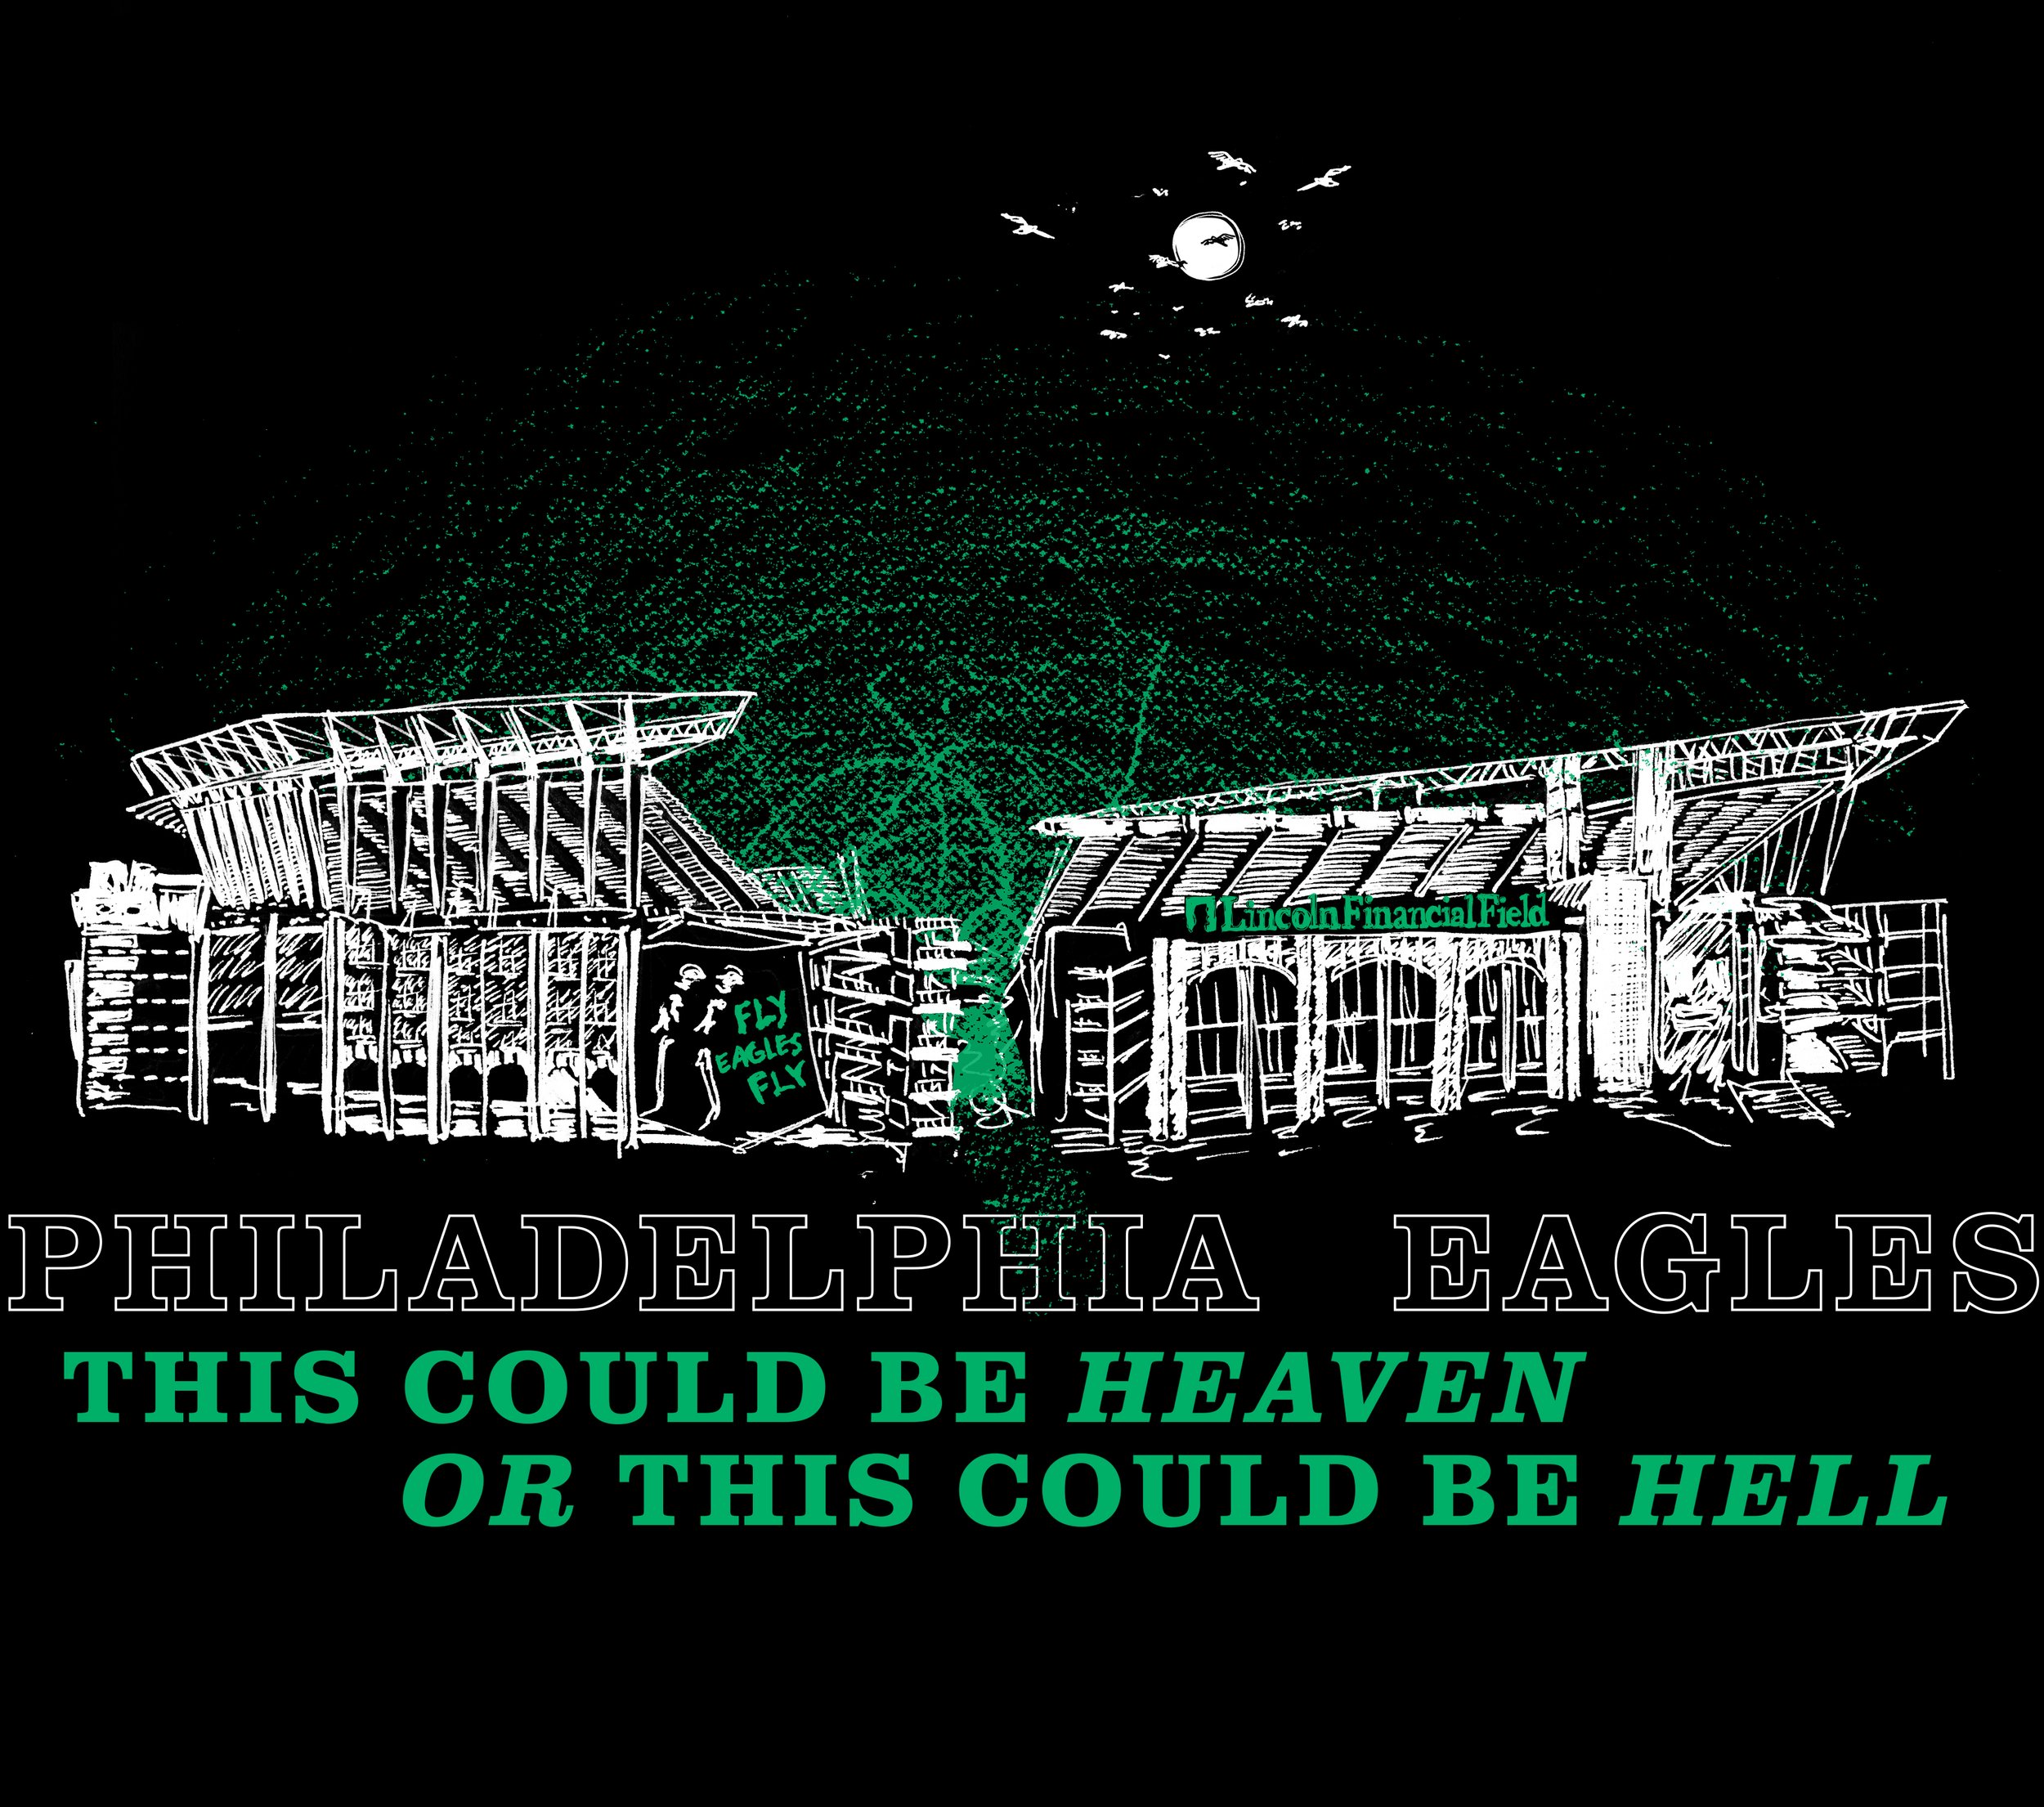 Eagles; Heaven or Hell